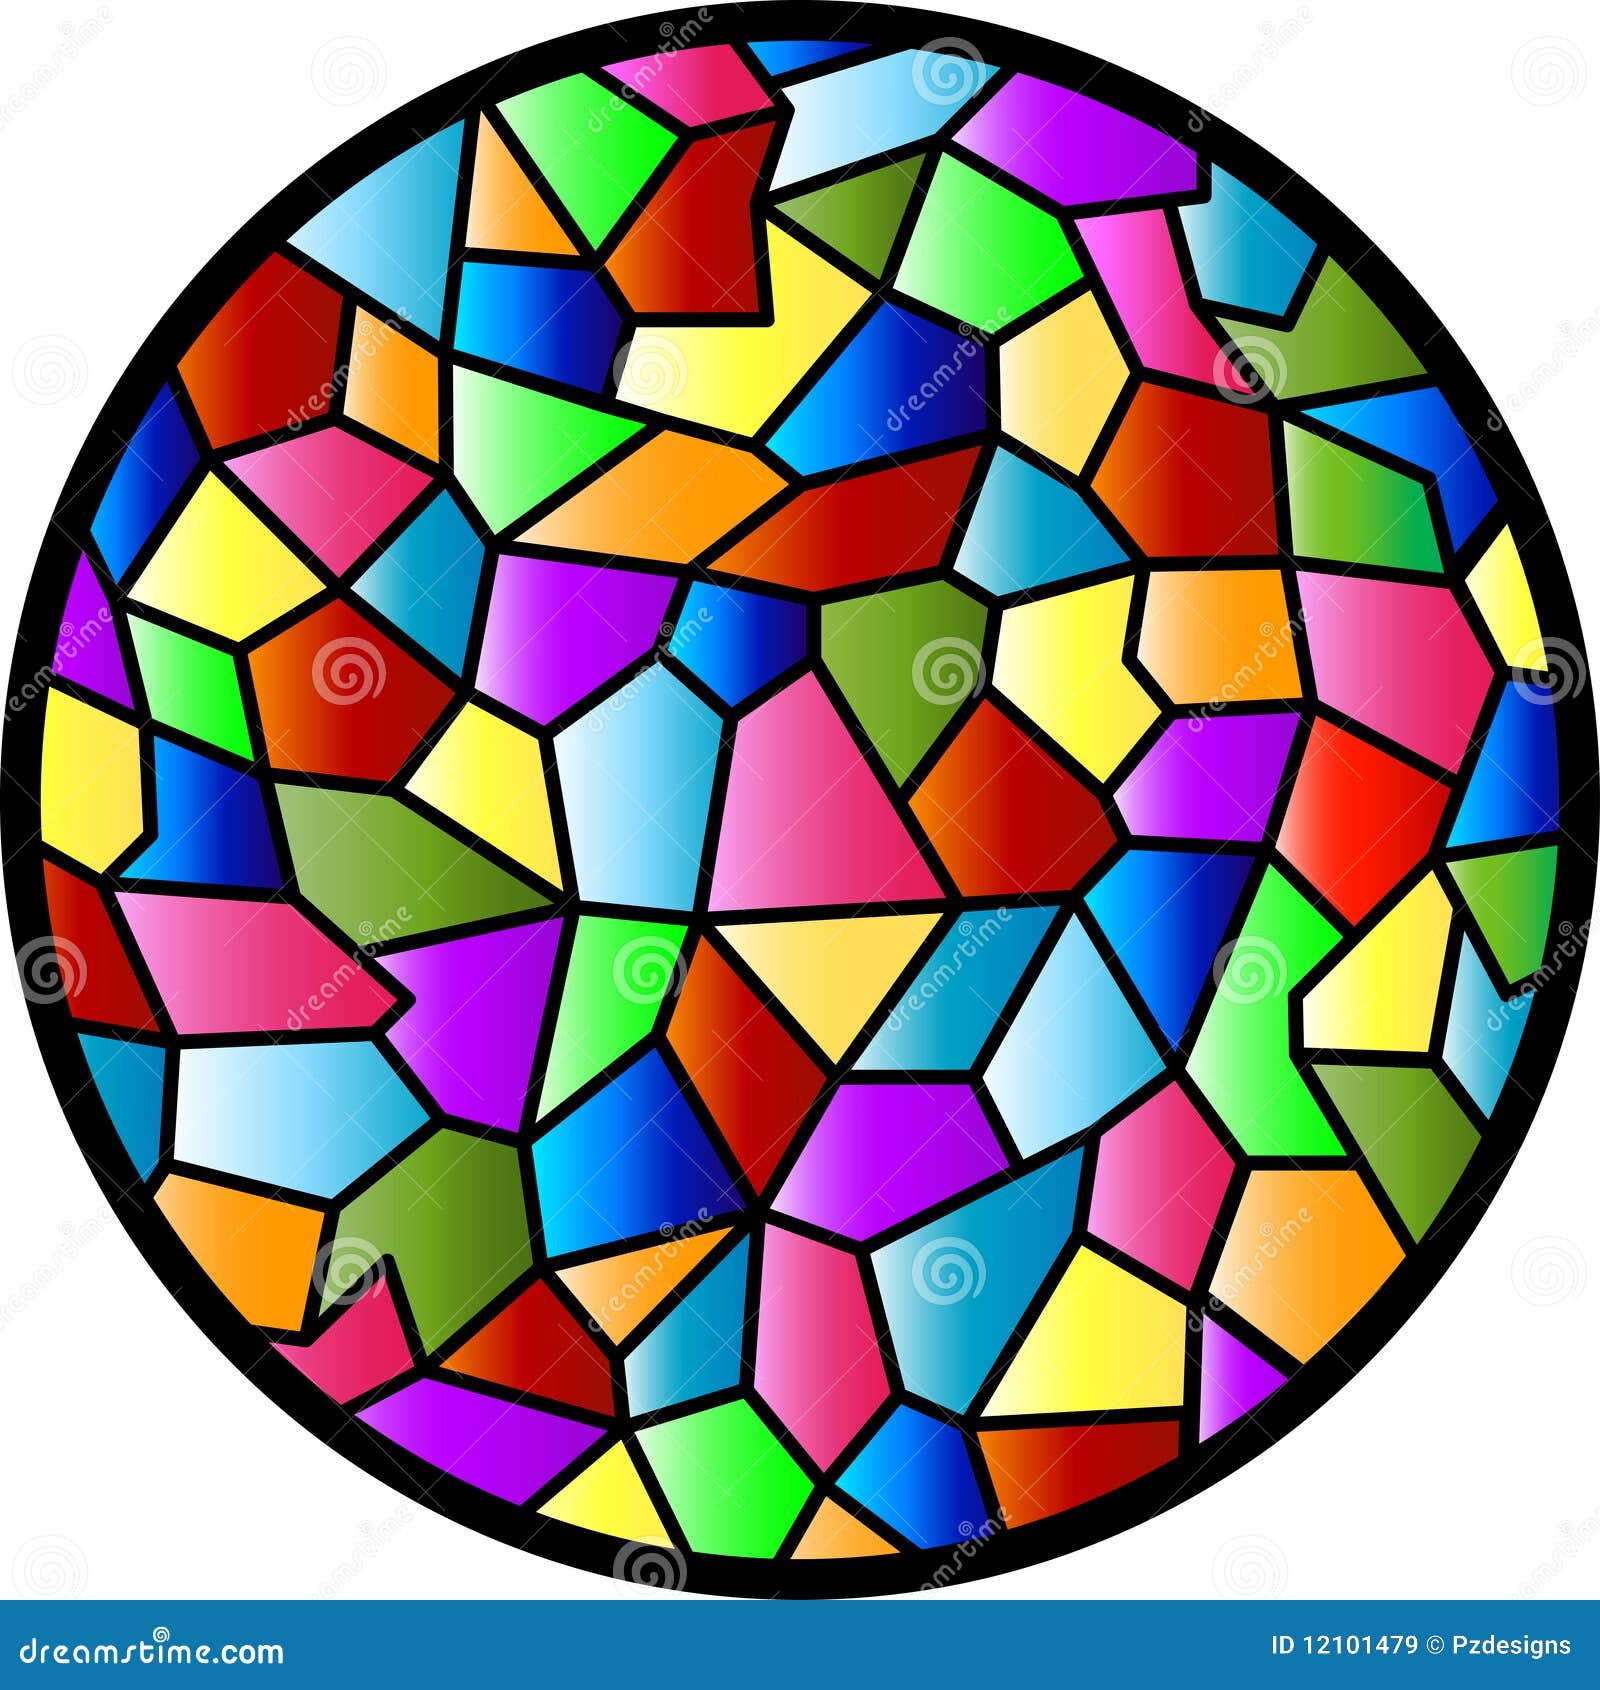 free clipart stained glass window - photo #15